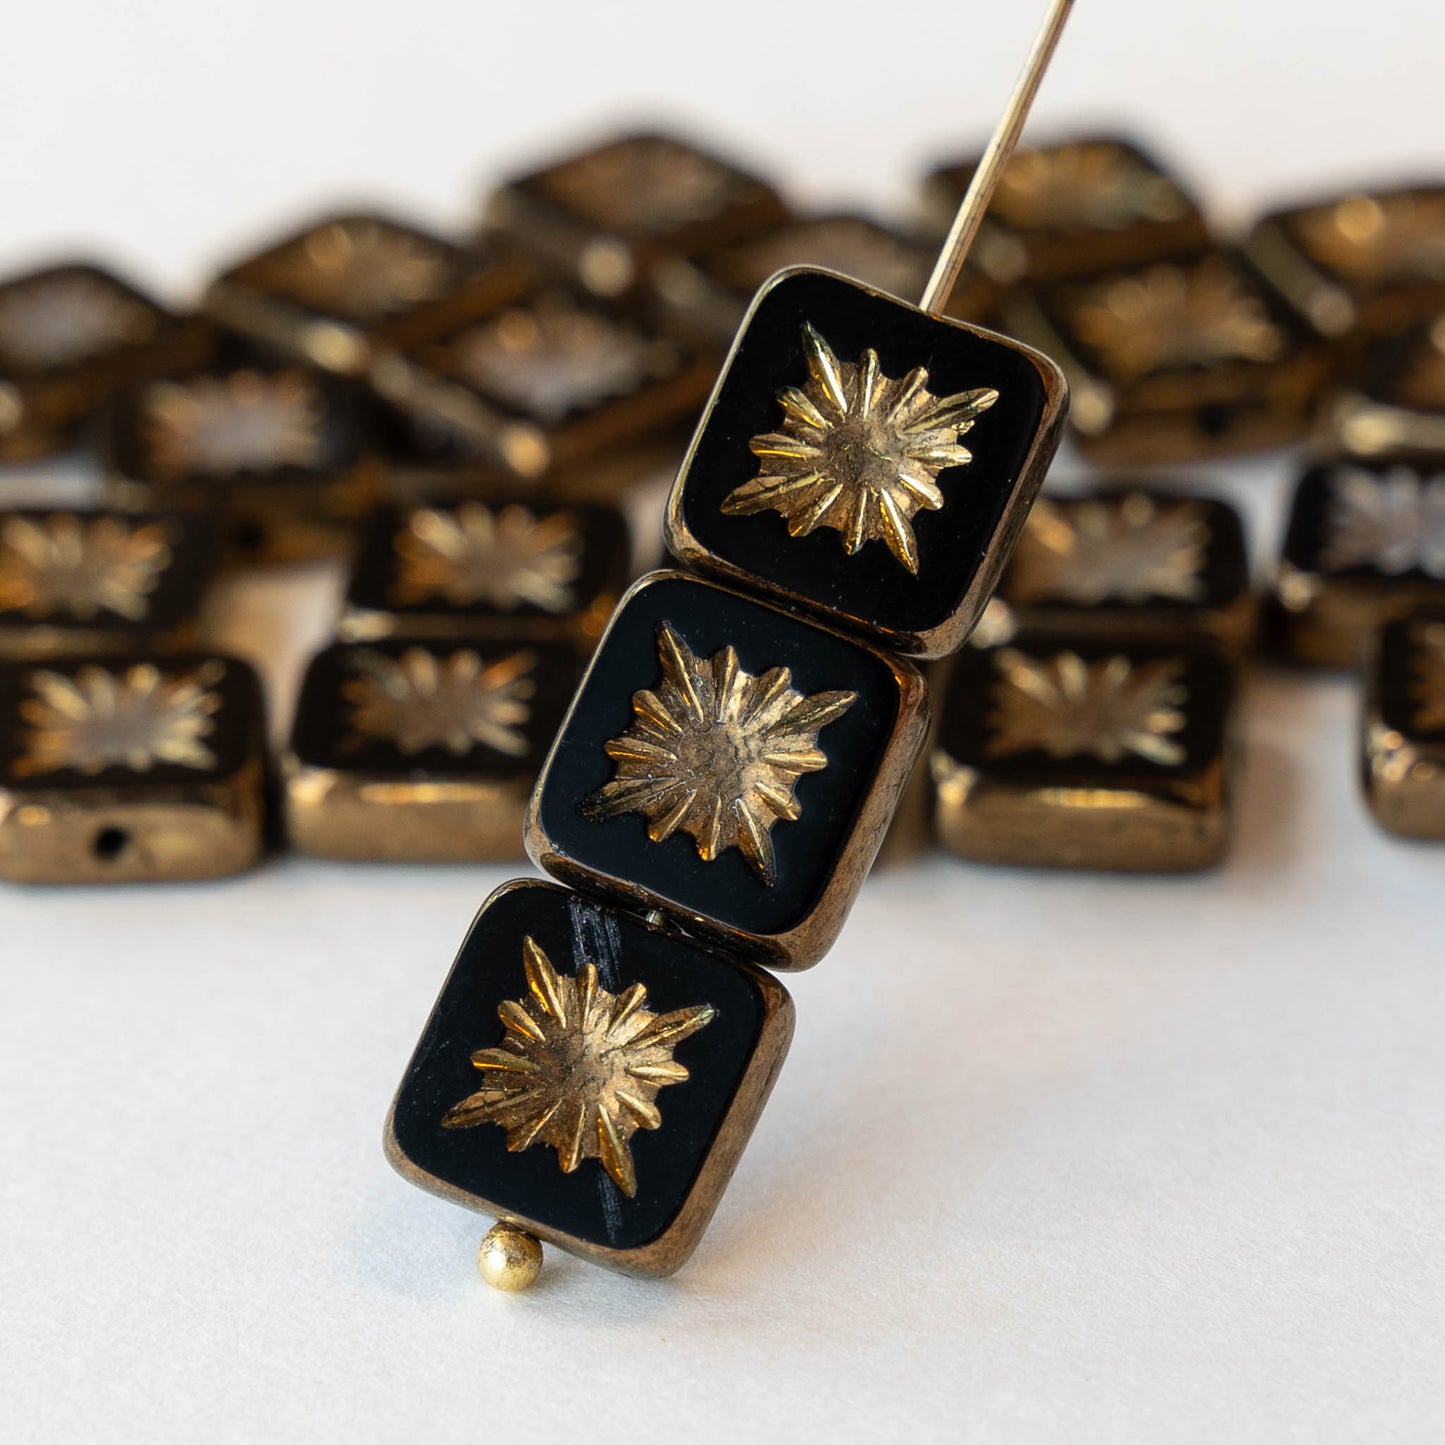 10mm Glass Tile Beads - Opaque Black with Gold Wash - 10